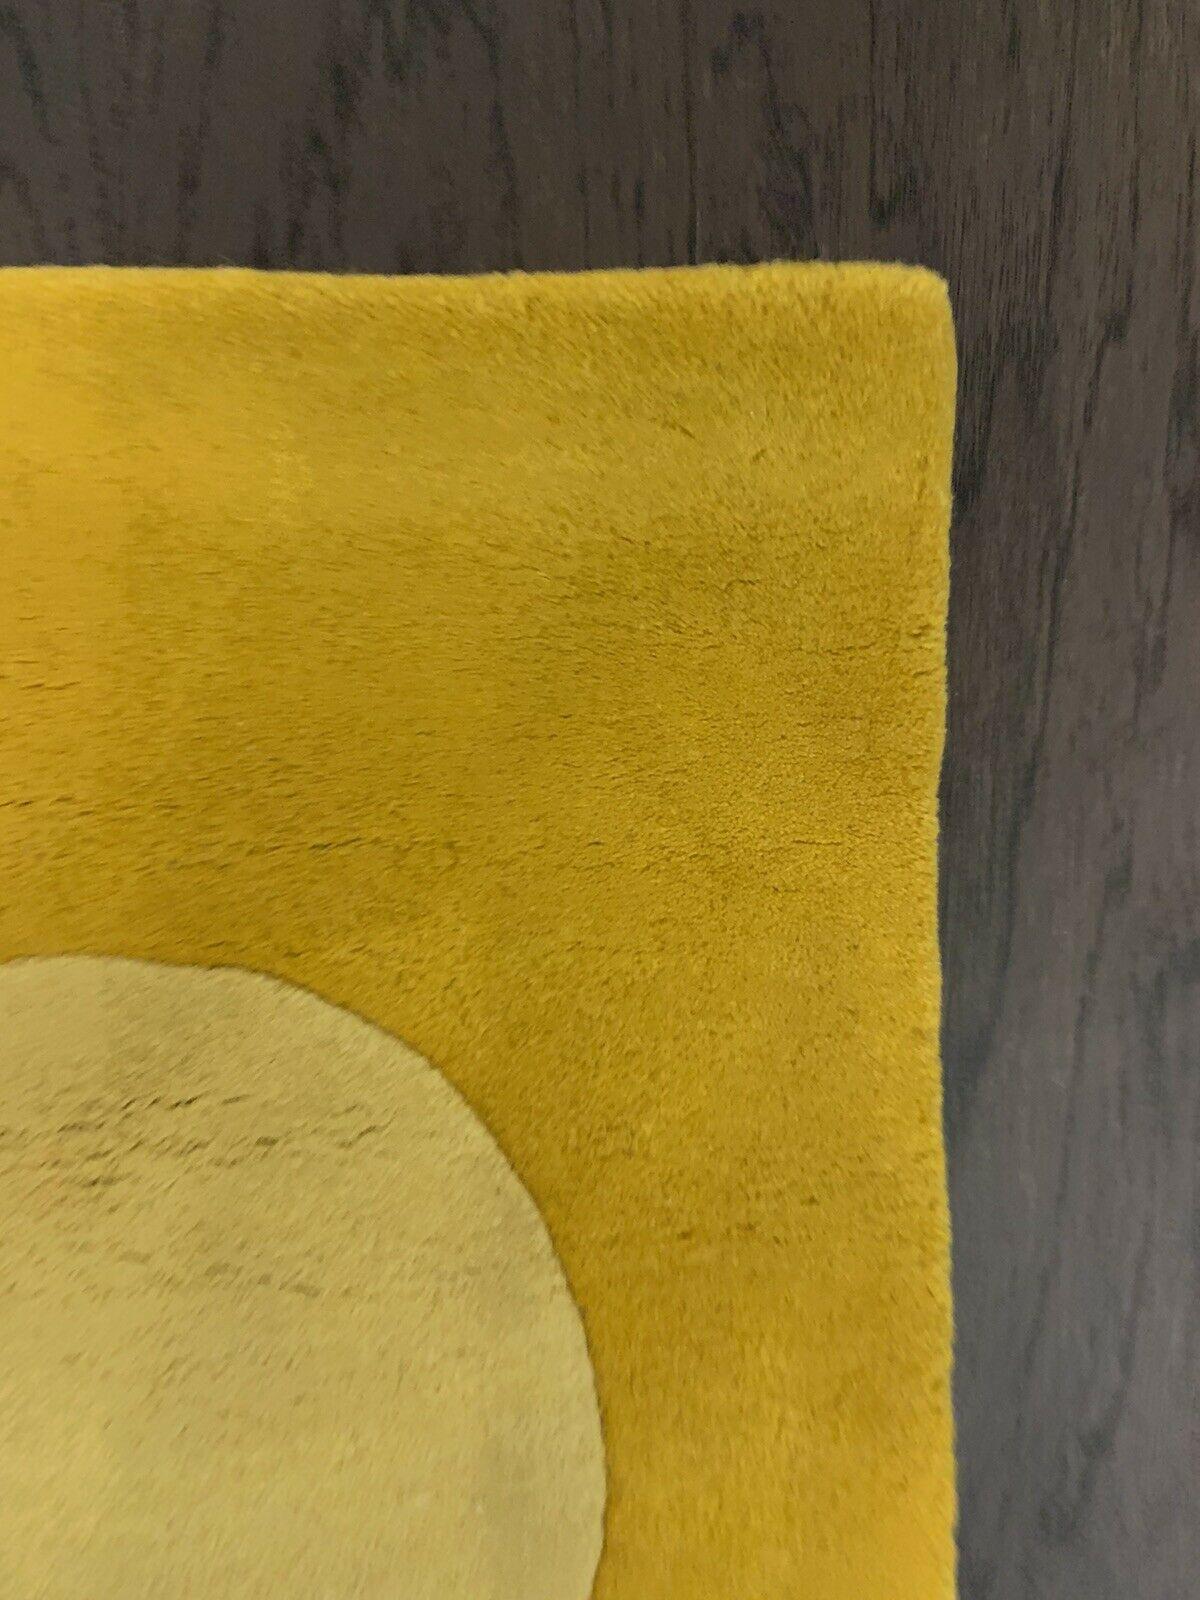 Introducing a stunning piece of art in the form of a rug by renowned artist Gary Hume. This numbered edition of 50 features a beautiful (Yellow) DOOR 1 design, hand tufted with high-quality handspun wool. Measuring 0.91 x 1.80m (3’ x 6’), this rug